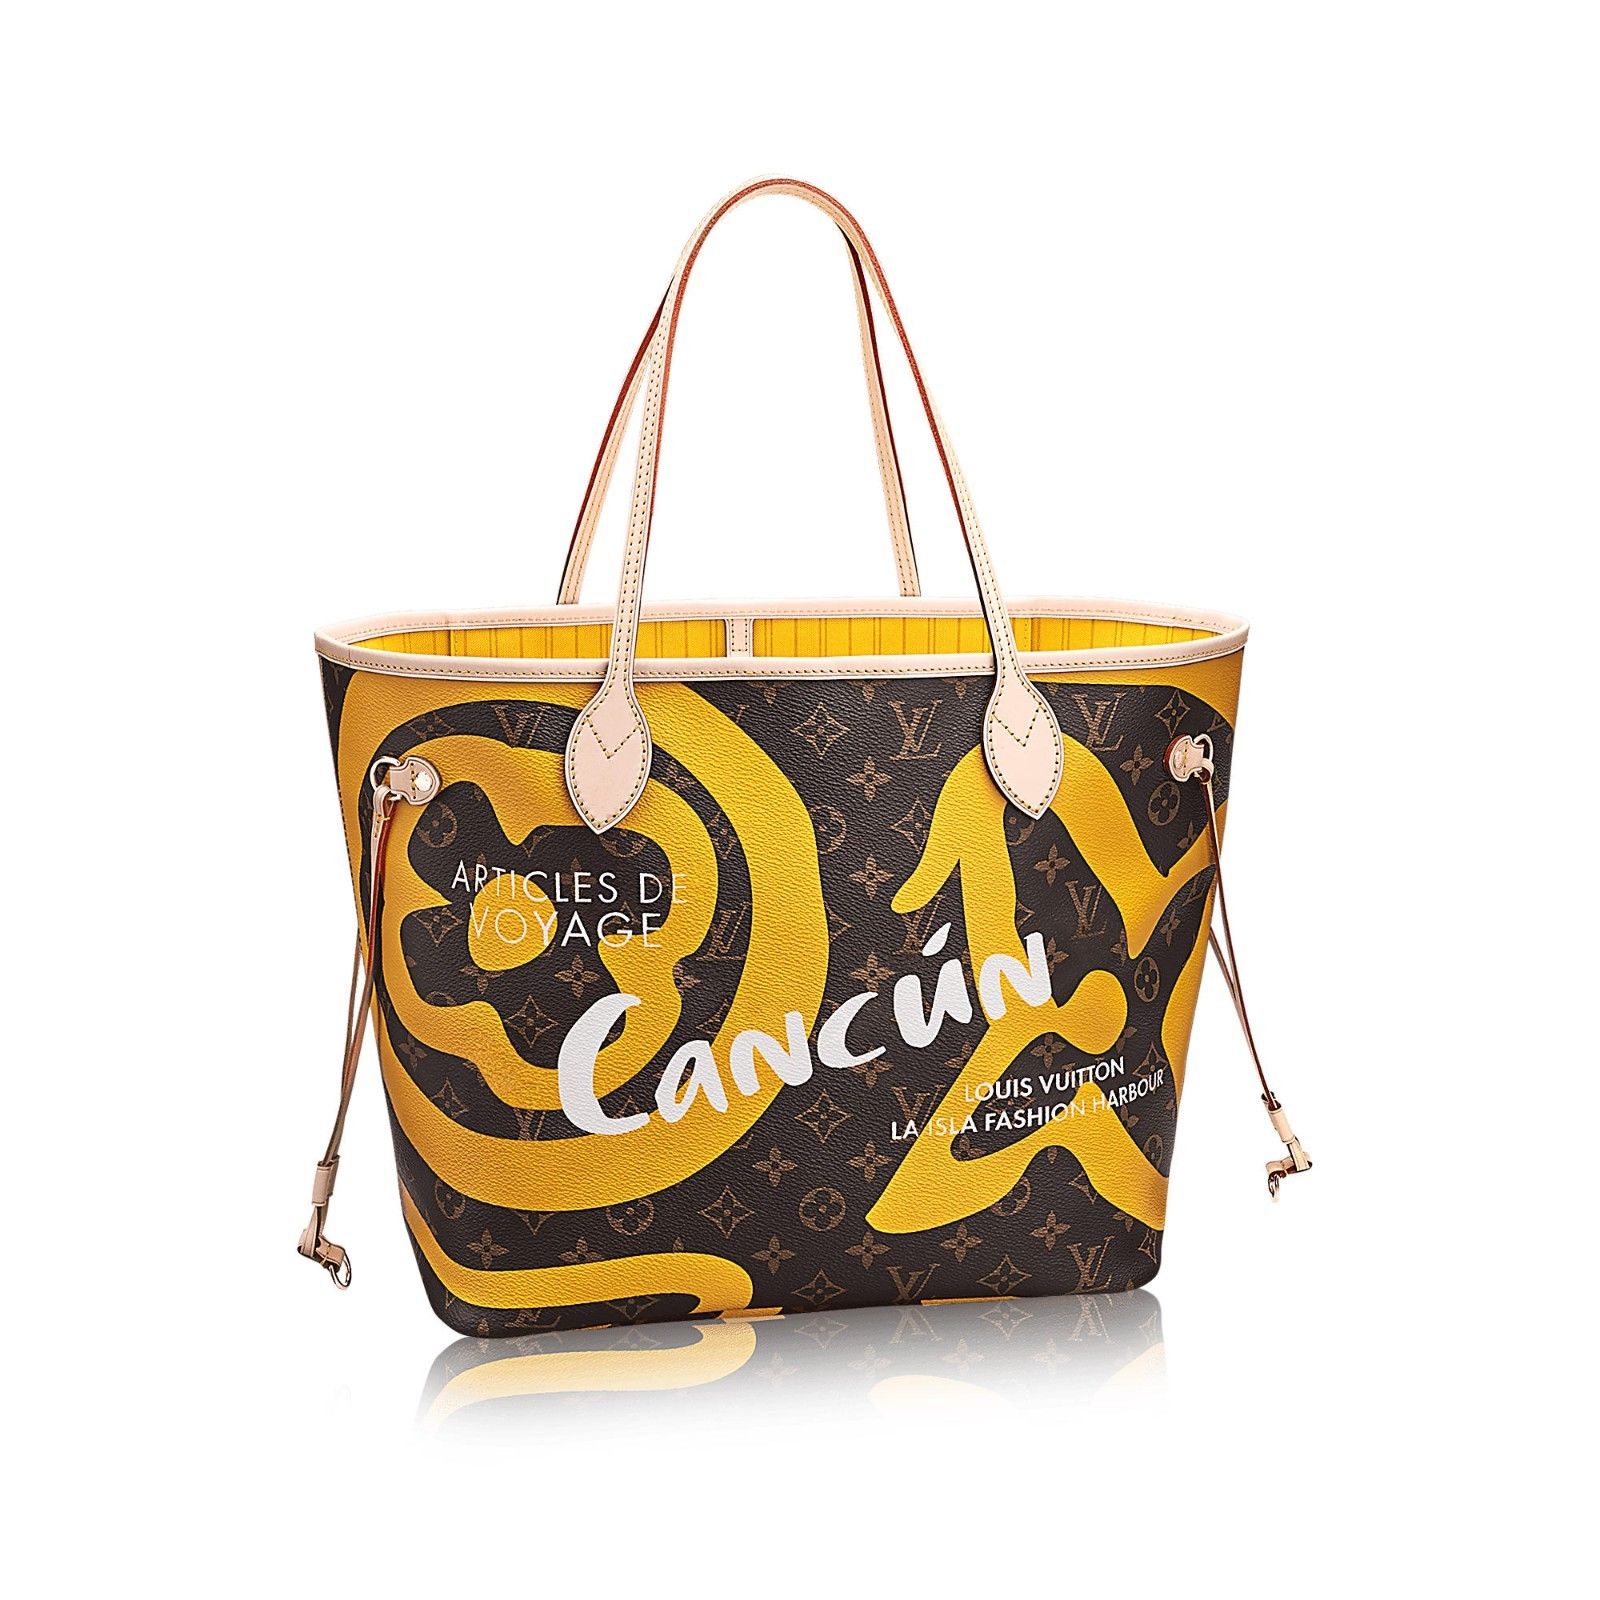 on Twitter: "NEW #LOUIS #VUITTON #CANCUN #NEVERFULL MM #Large #Bag #Tote #YELLOW #TAHITIENNE #Limited https://t.co/AtjfohVCZ1 https://t.co/EFhmKAfZ58" / Twitter